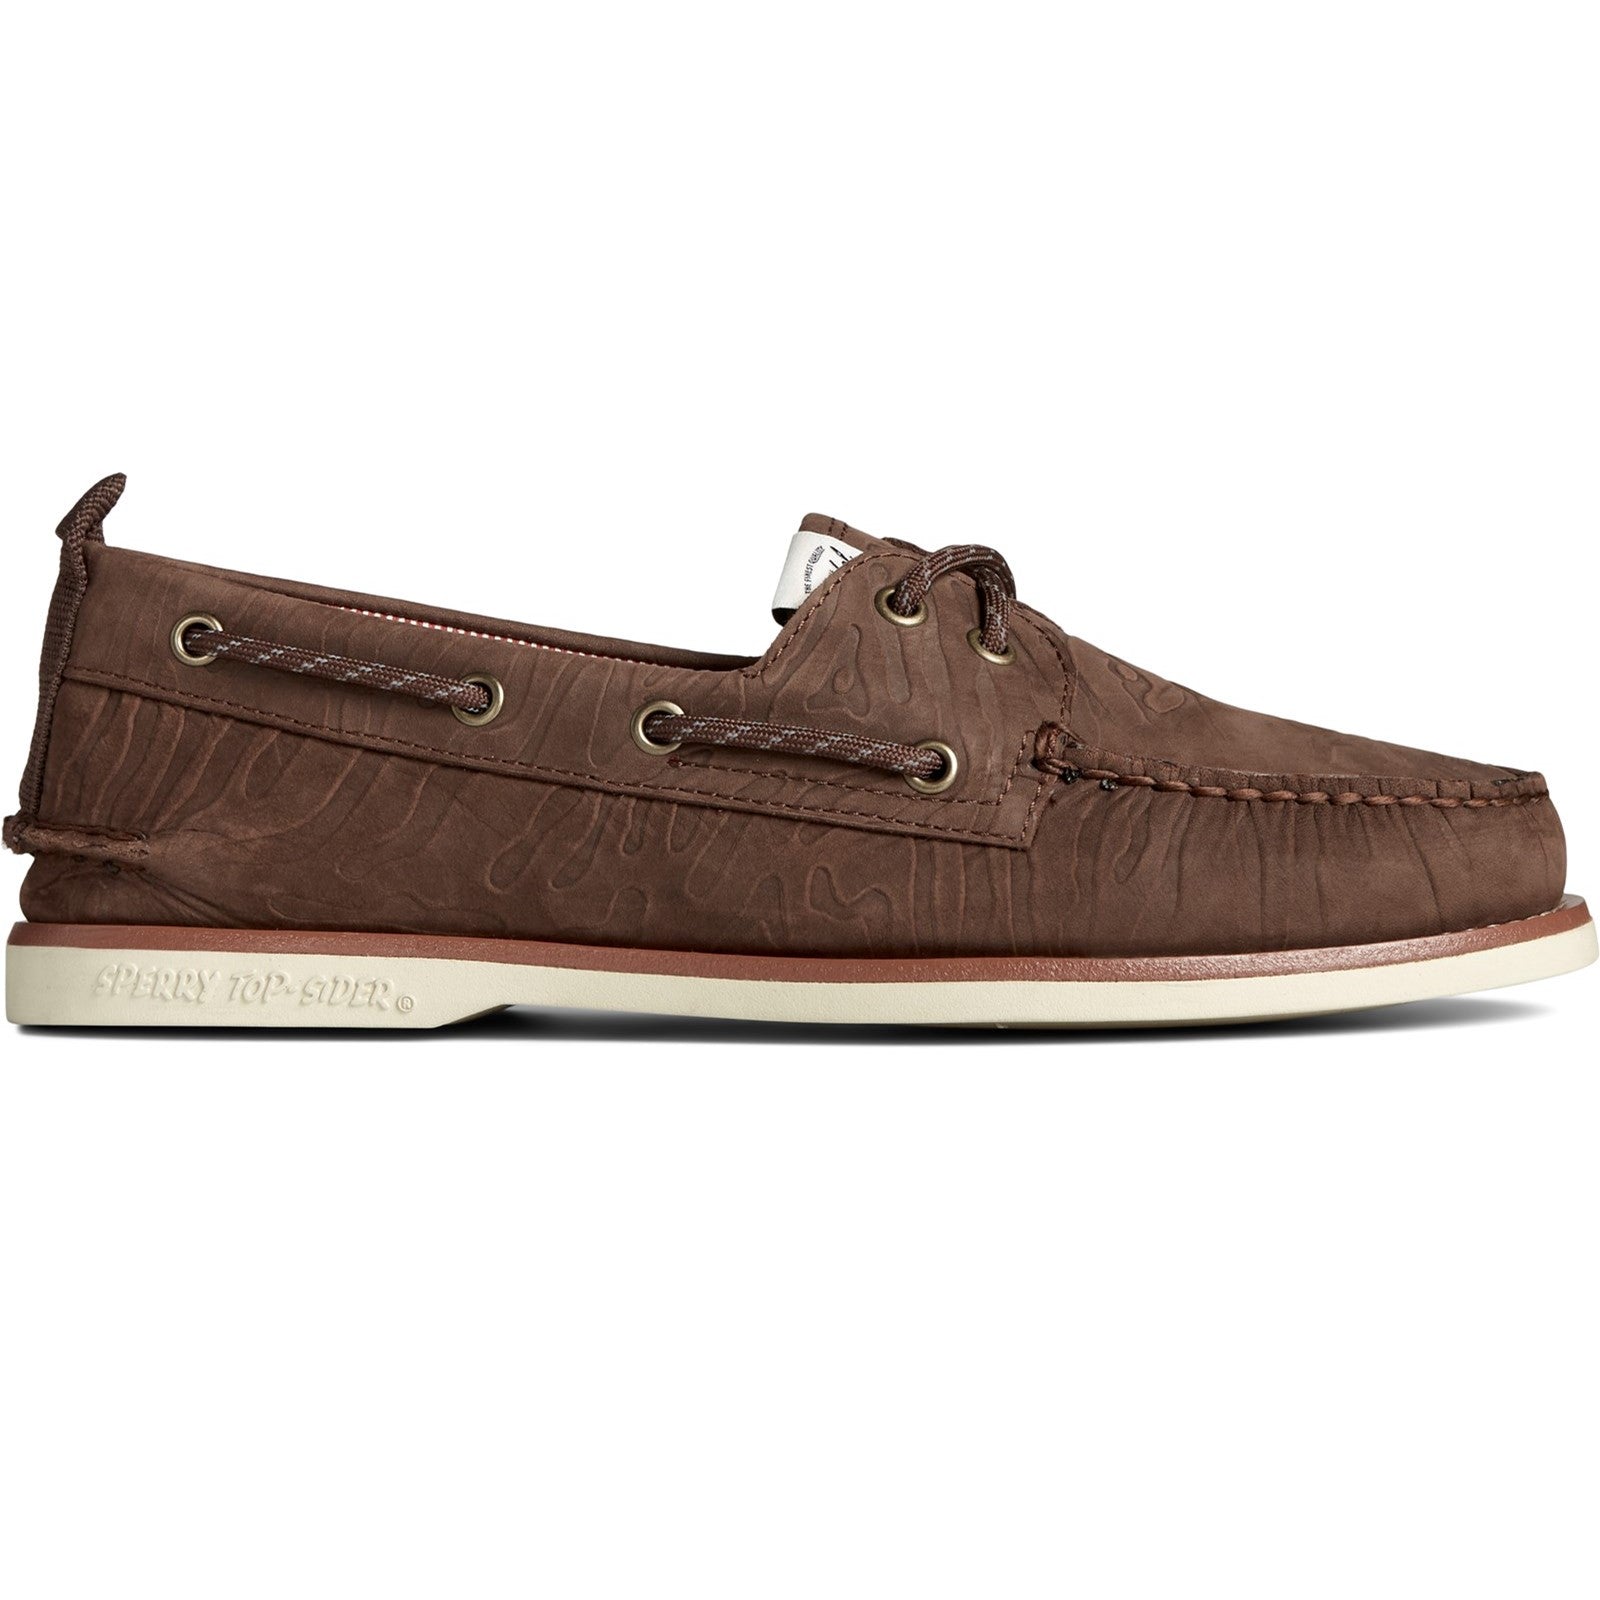 Sperry Mens Authentic Original 2-Eye Boat Shoes - Brown